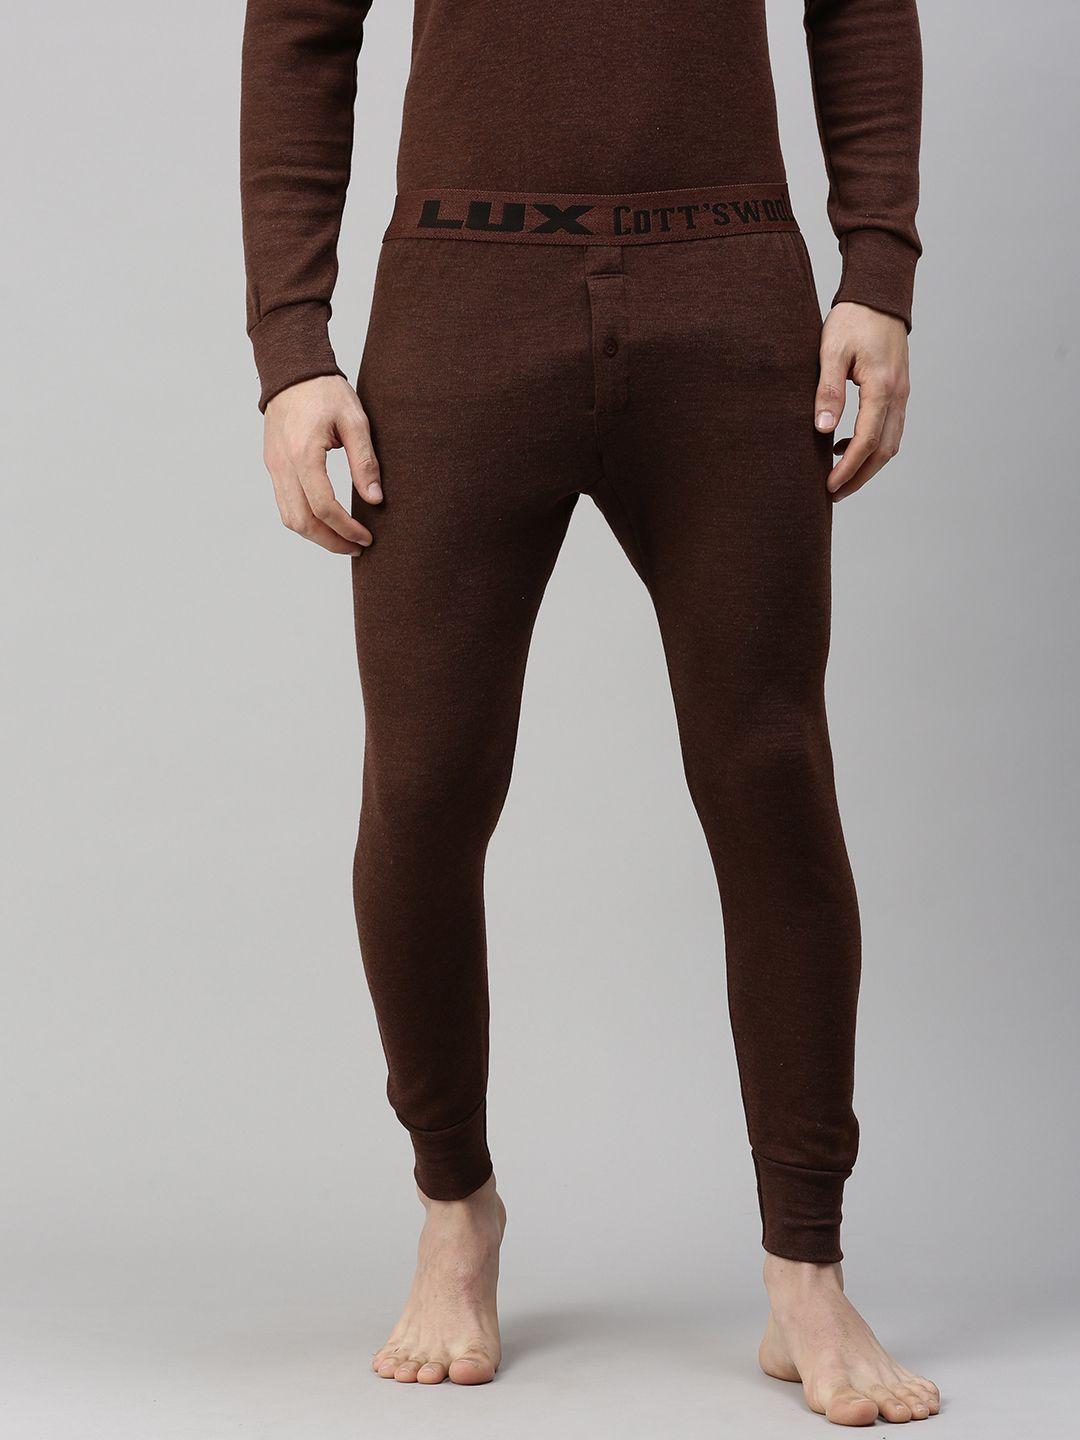 lux cottswool men brown solid cotton thermal bottoms